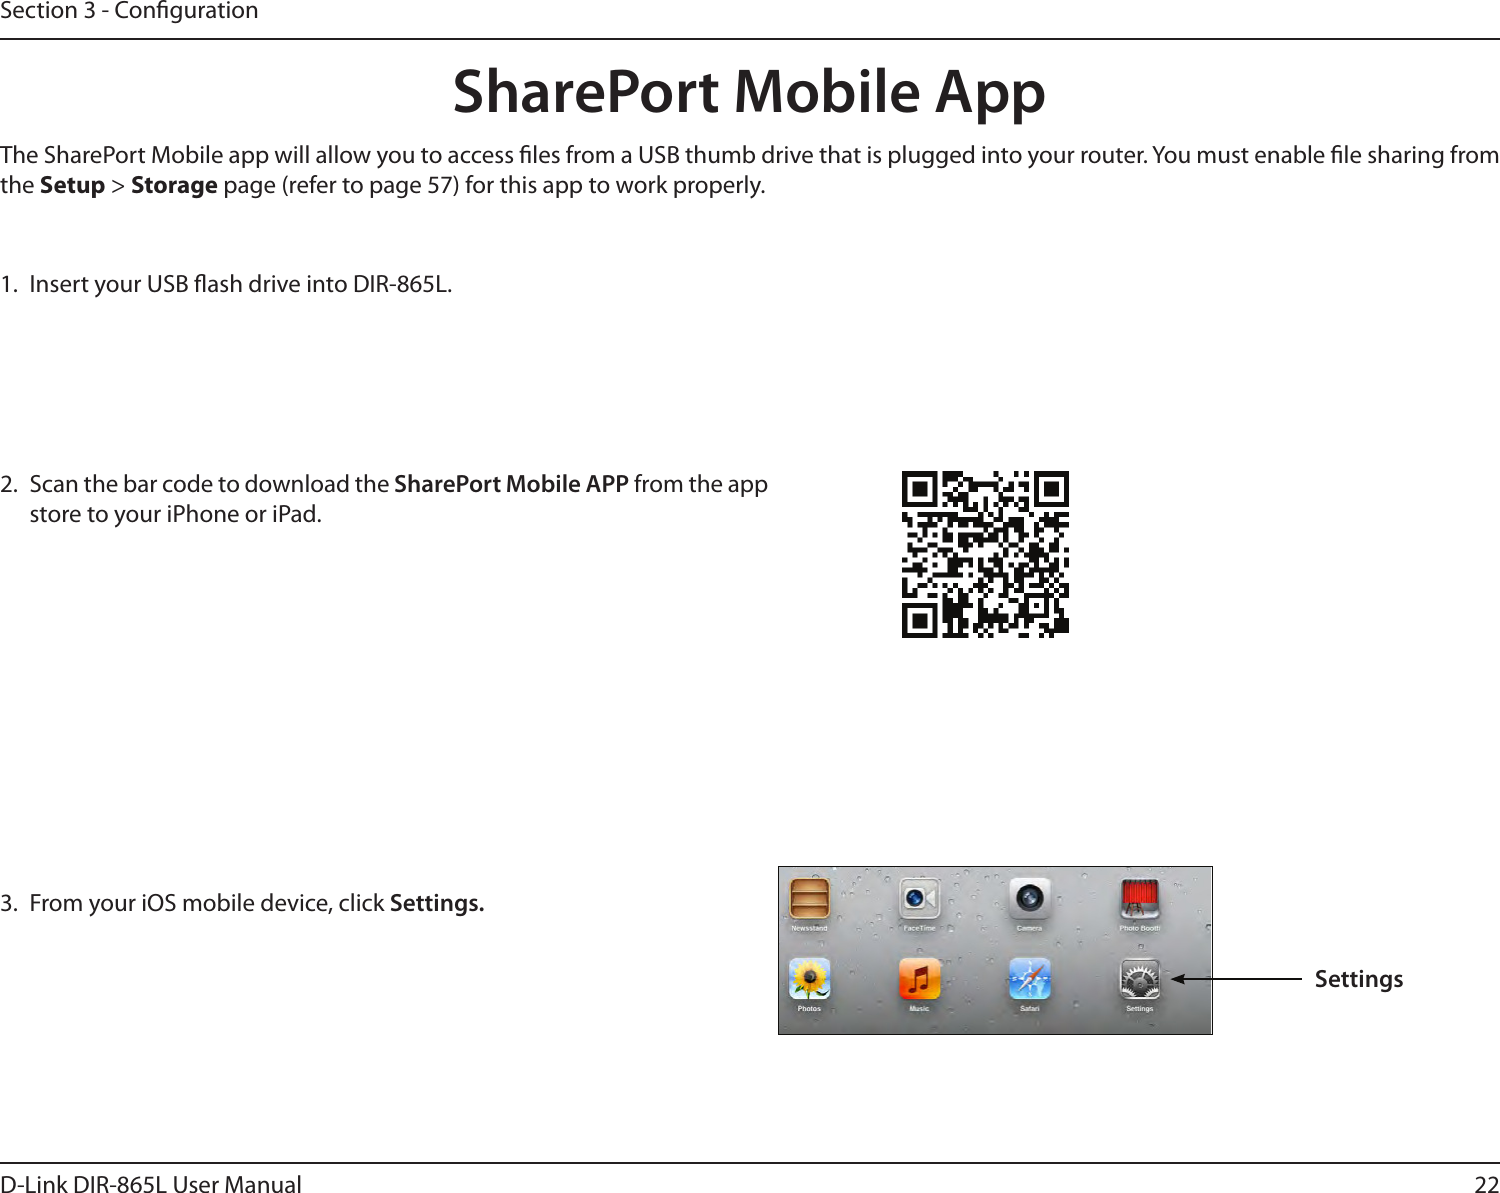 22D-Link DIR-865L User ManualSection 3 - Conguration1.  Insert your USB ash drive into DIR-865L.2.  Scan the bar code to download the SharePort Mobile APP from the app store to your iPhone or iPad.SharePort Mobile App3.  From your iOS mobile device, click Settings. The SharePort Mobile app will allow you to access les from a USB thumb drive that is plugged into your router. You must enable le sharing from the Setup &gt; Storage page (refer to page 57) for this app to work properly.Settings